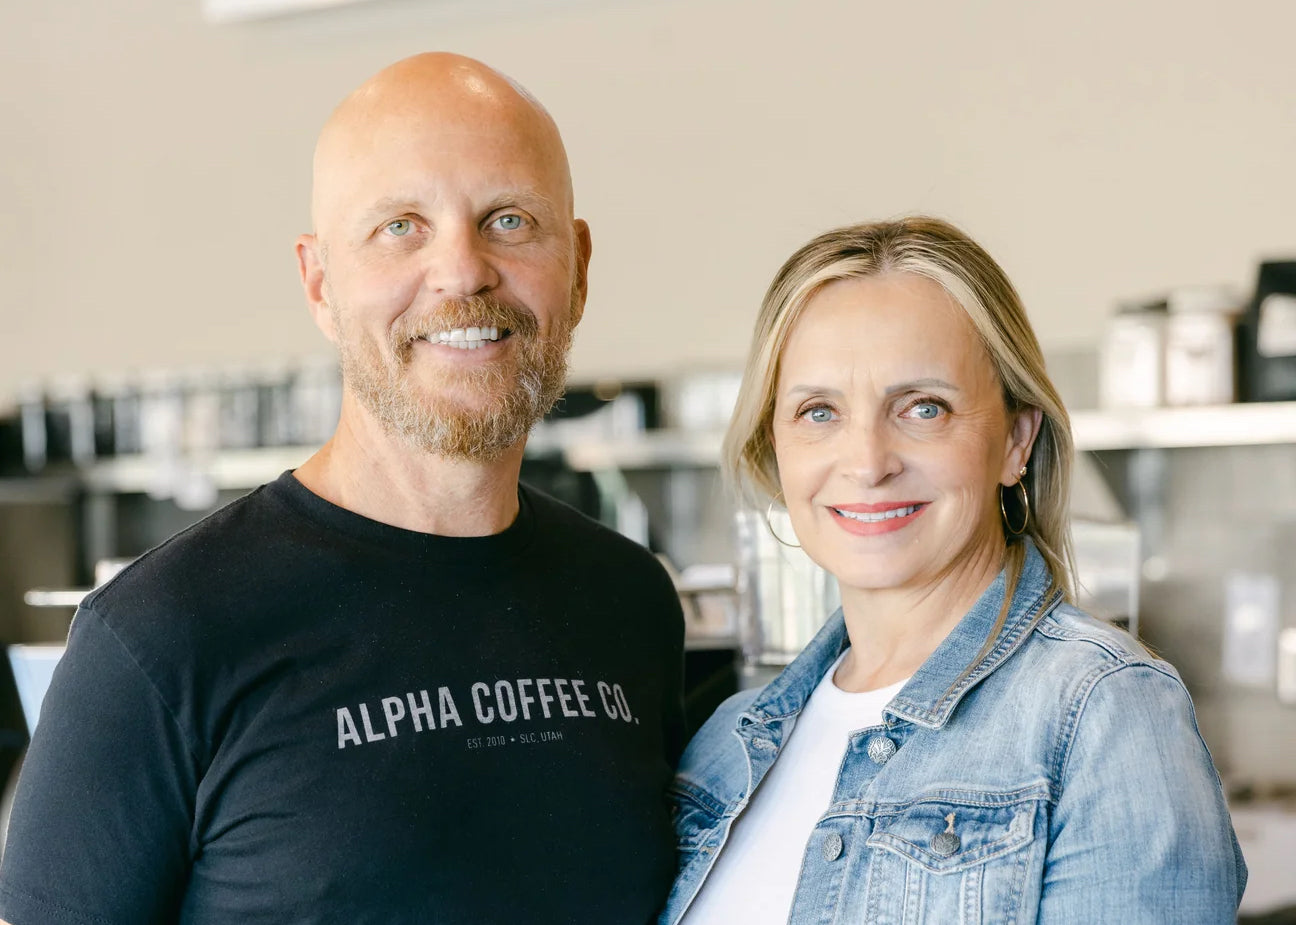 Portrait of Alpha Coffee founder Carl Churchill and his wife